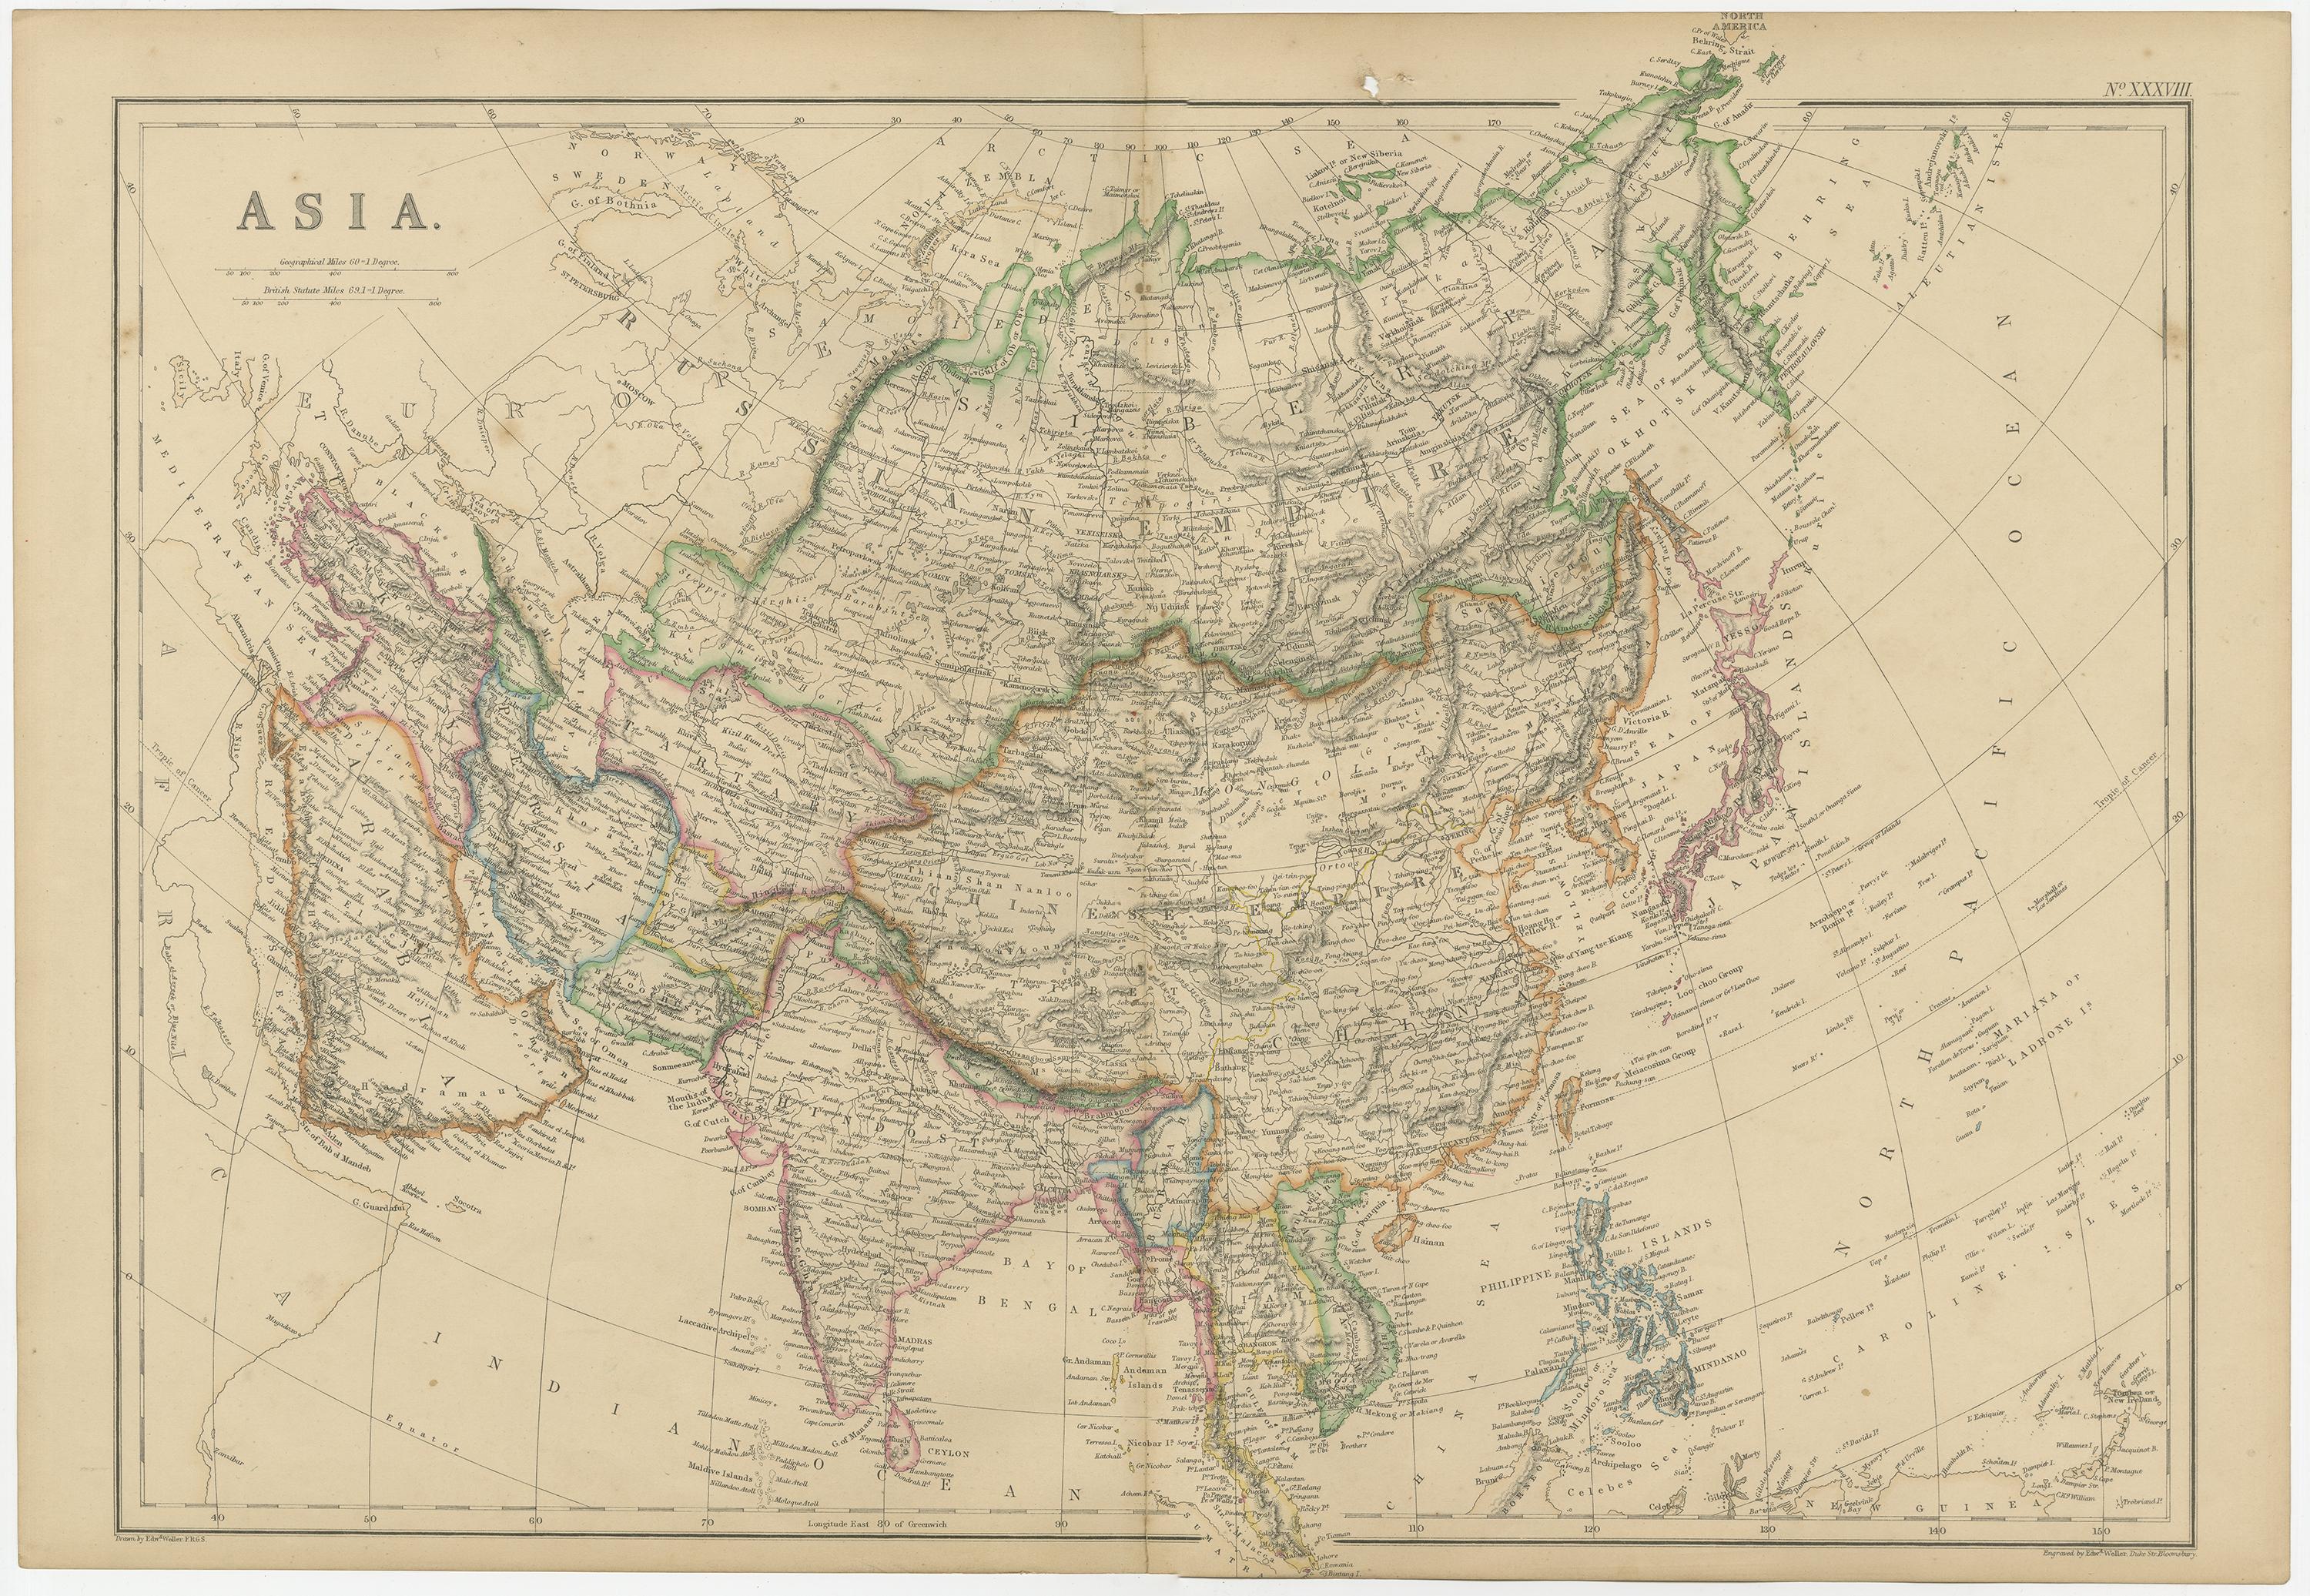 Paper Original 1859 Map of Asia from W.G. Blackie's Imperial Atlas of Modern Geography For Sale